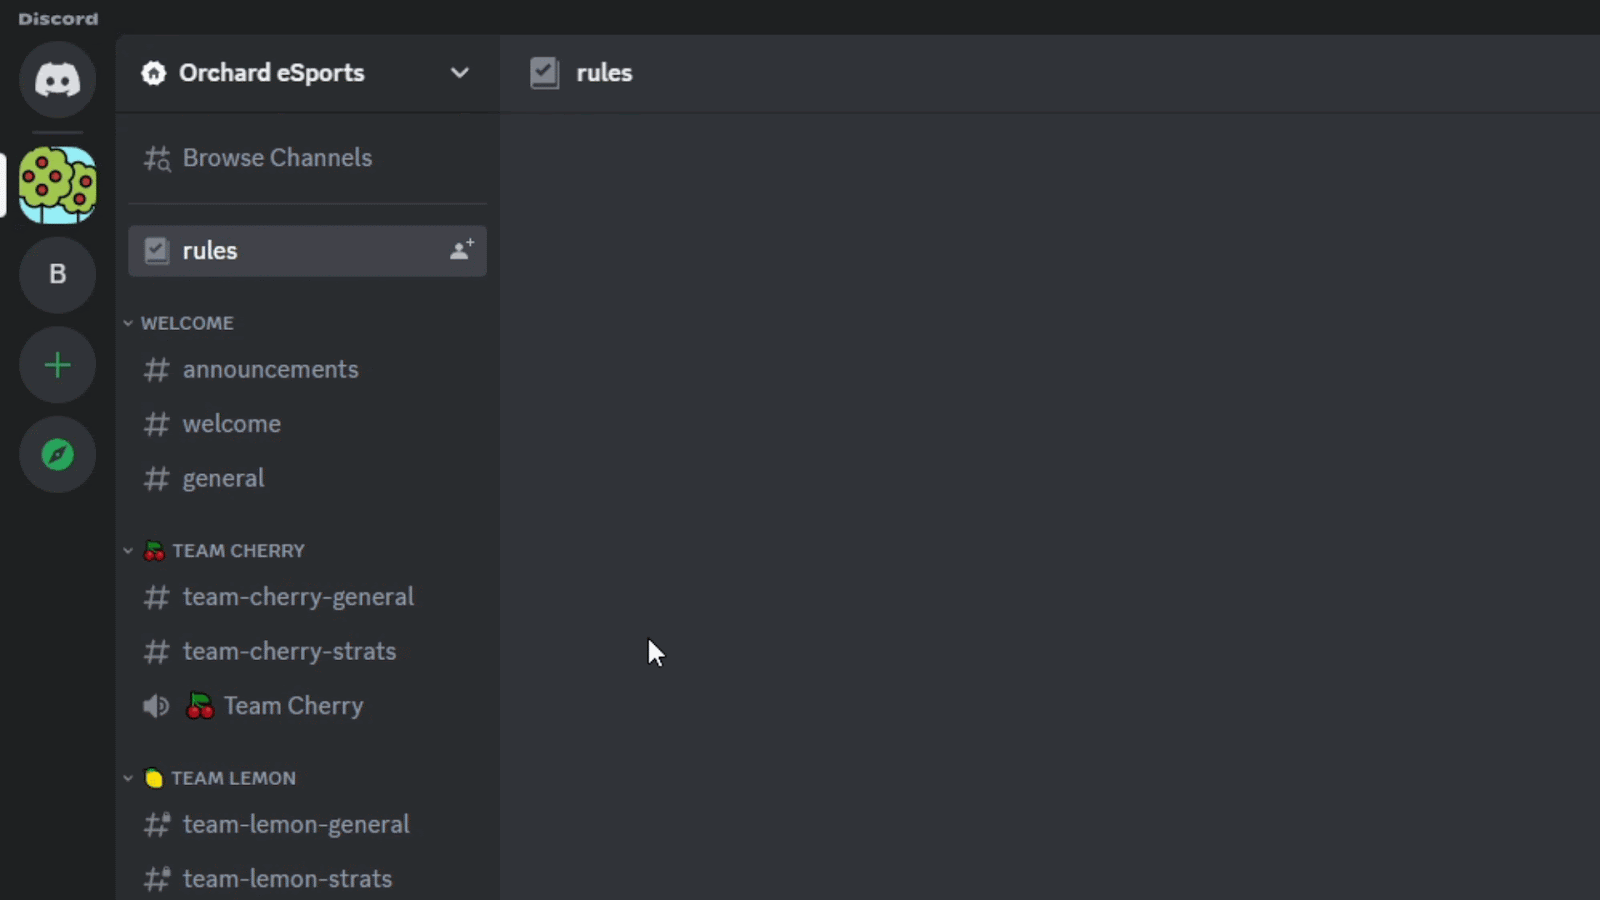 manage your discord server